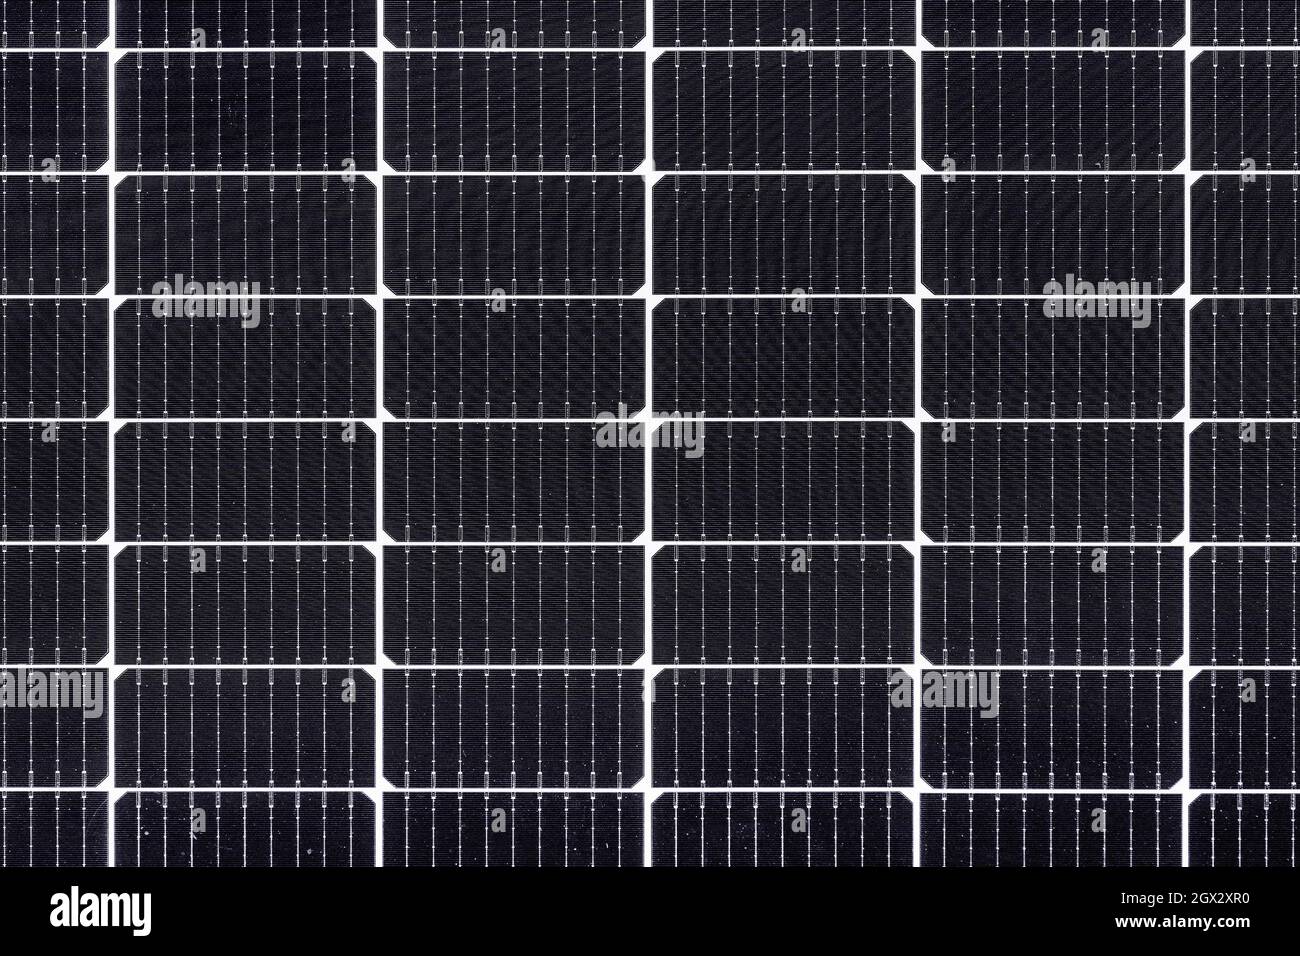 Surface of photovoltaic cells on solar panel of PV system as nackground Stock Photo